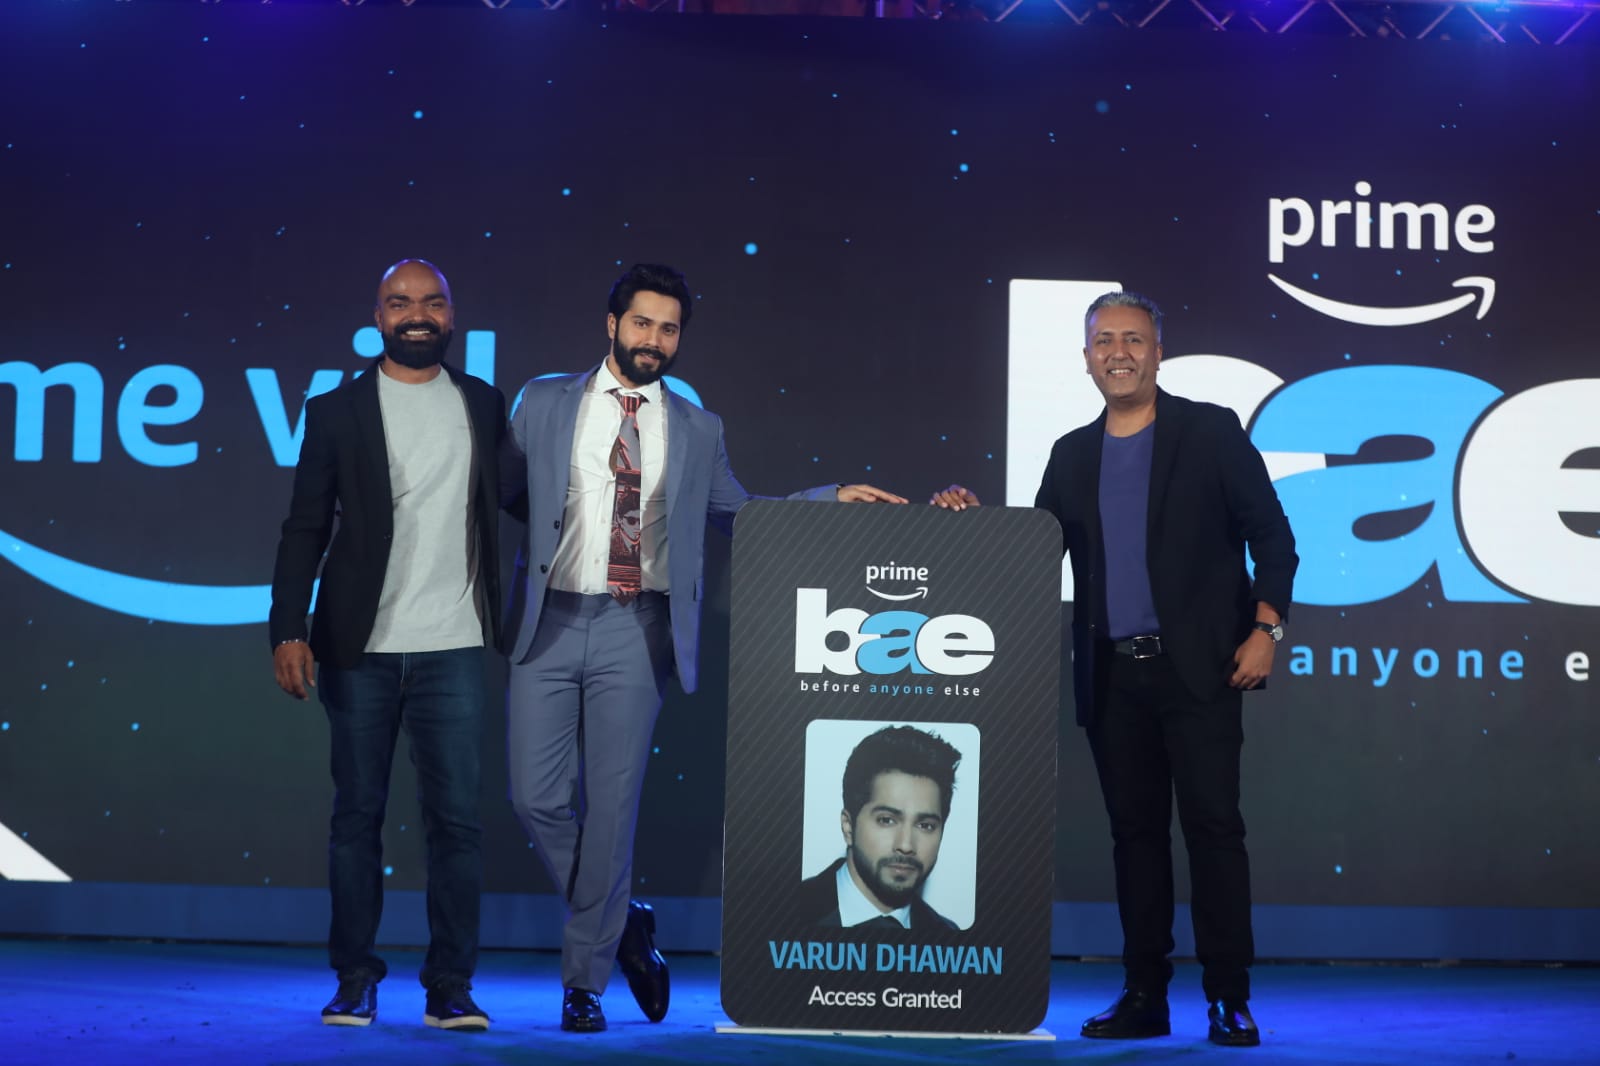 Prime Video unveils Varun Dhawan as the first Prime Bae; now get the inside scoop on Prime Video Before Anyone Else!